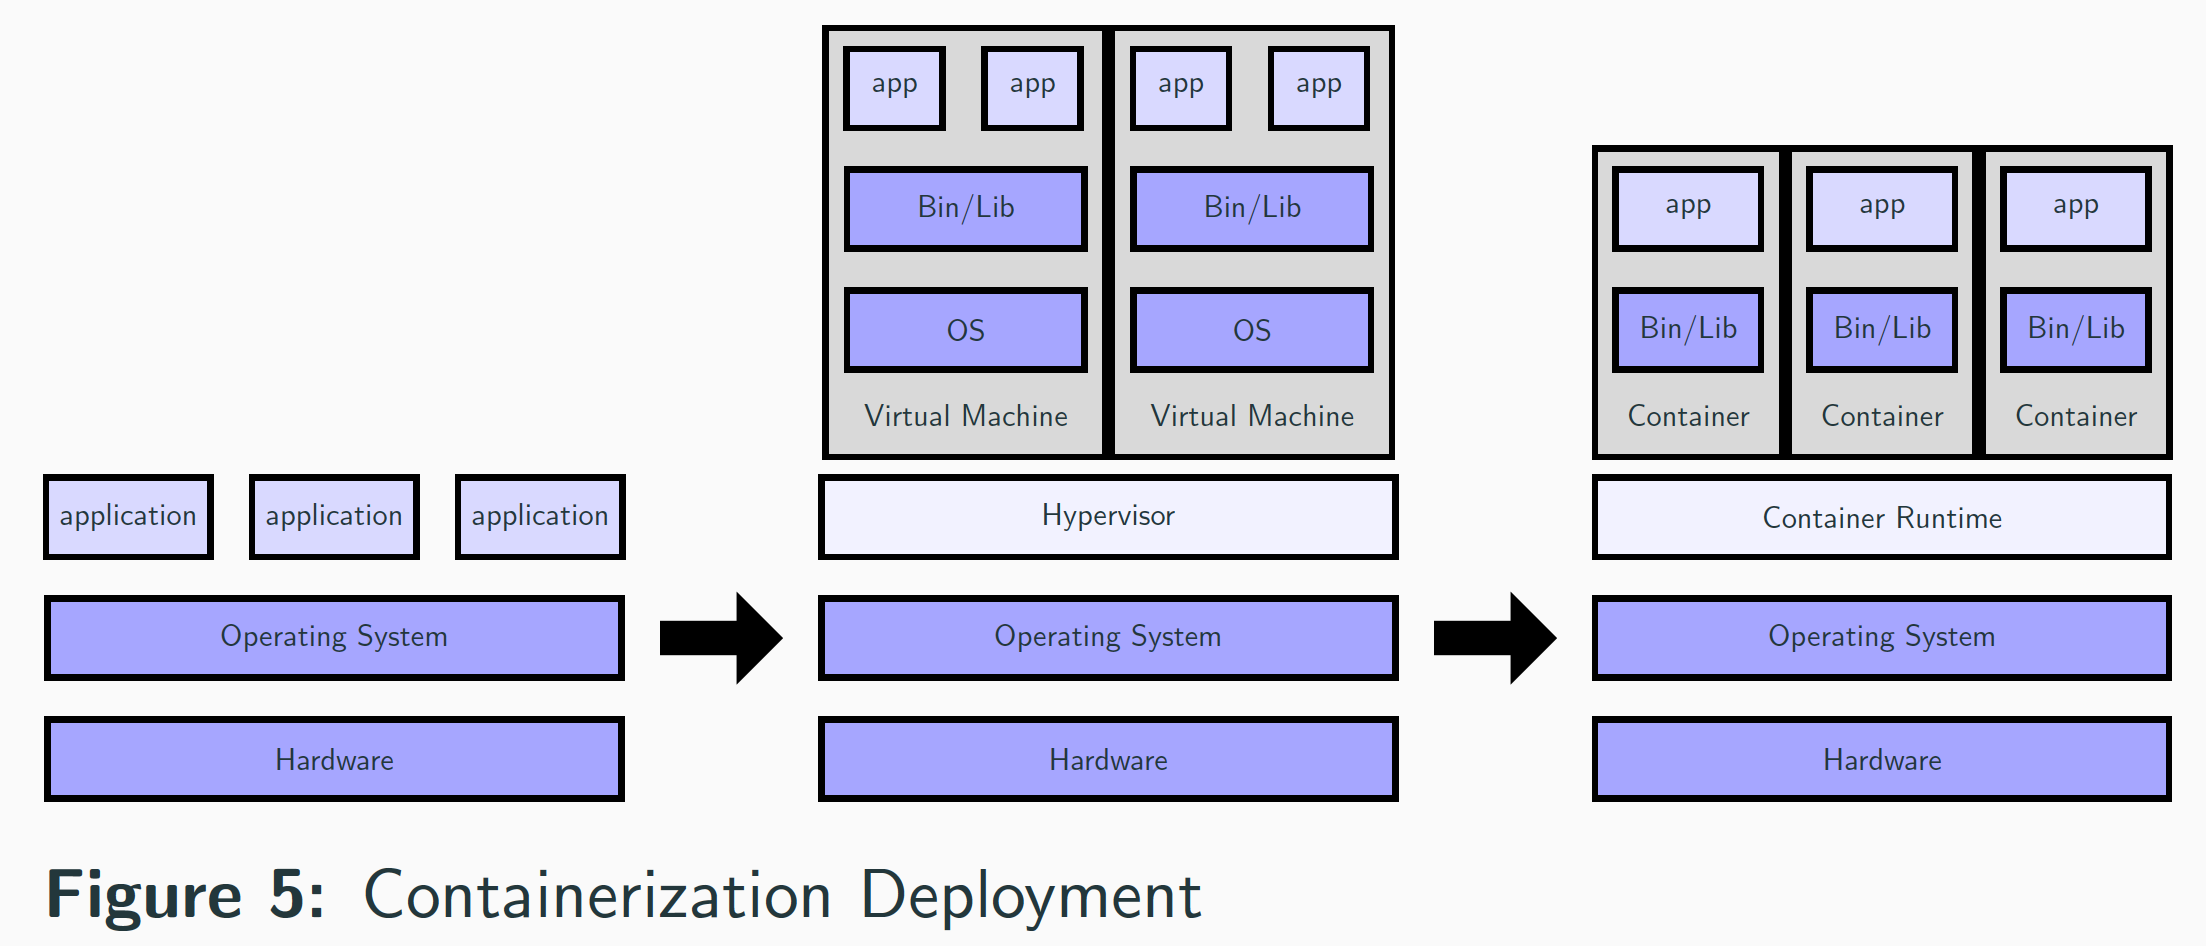 Containerized Deployment